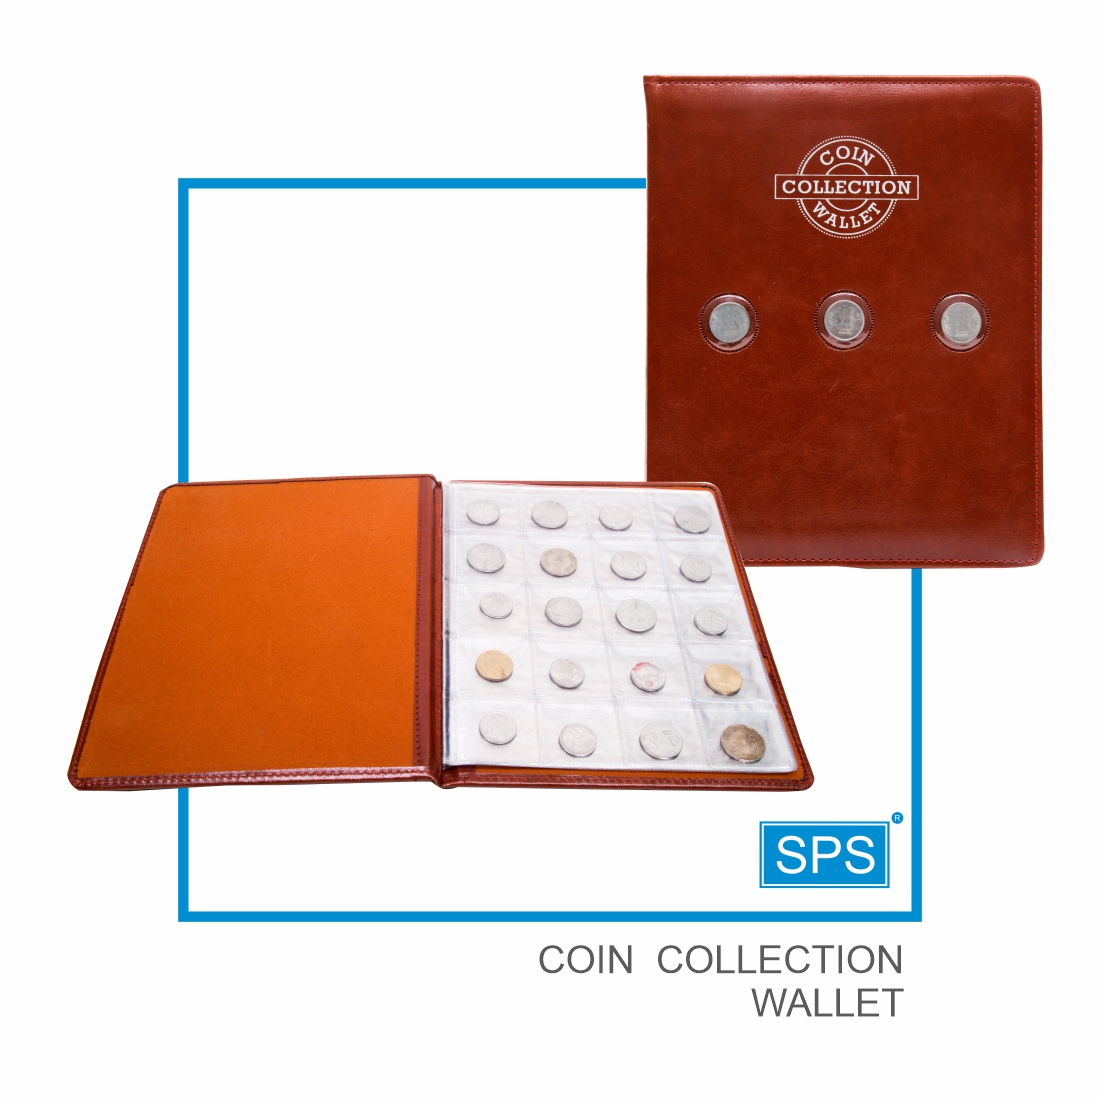 COIN COLLECTION WALLET